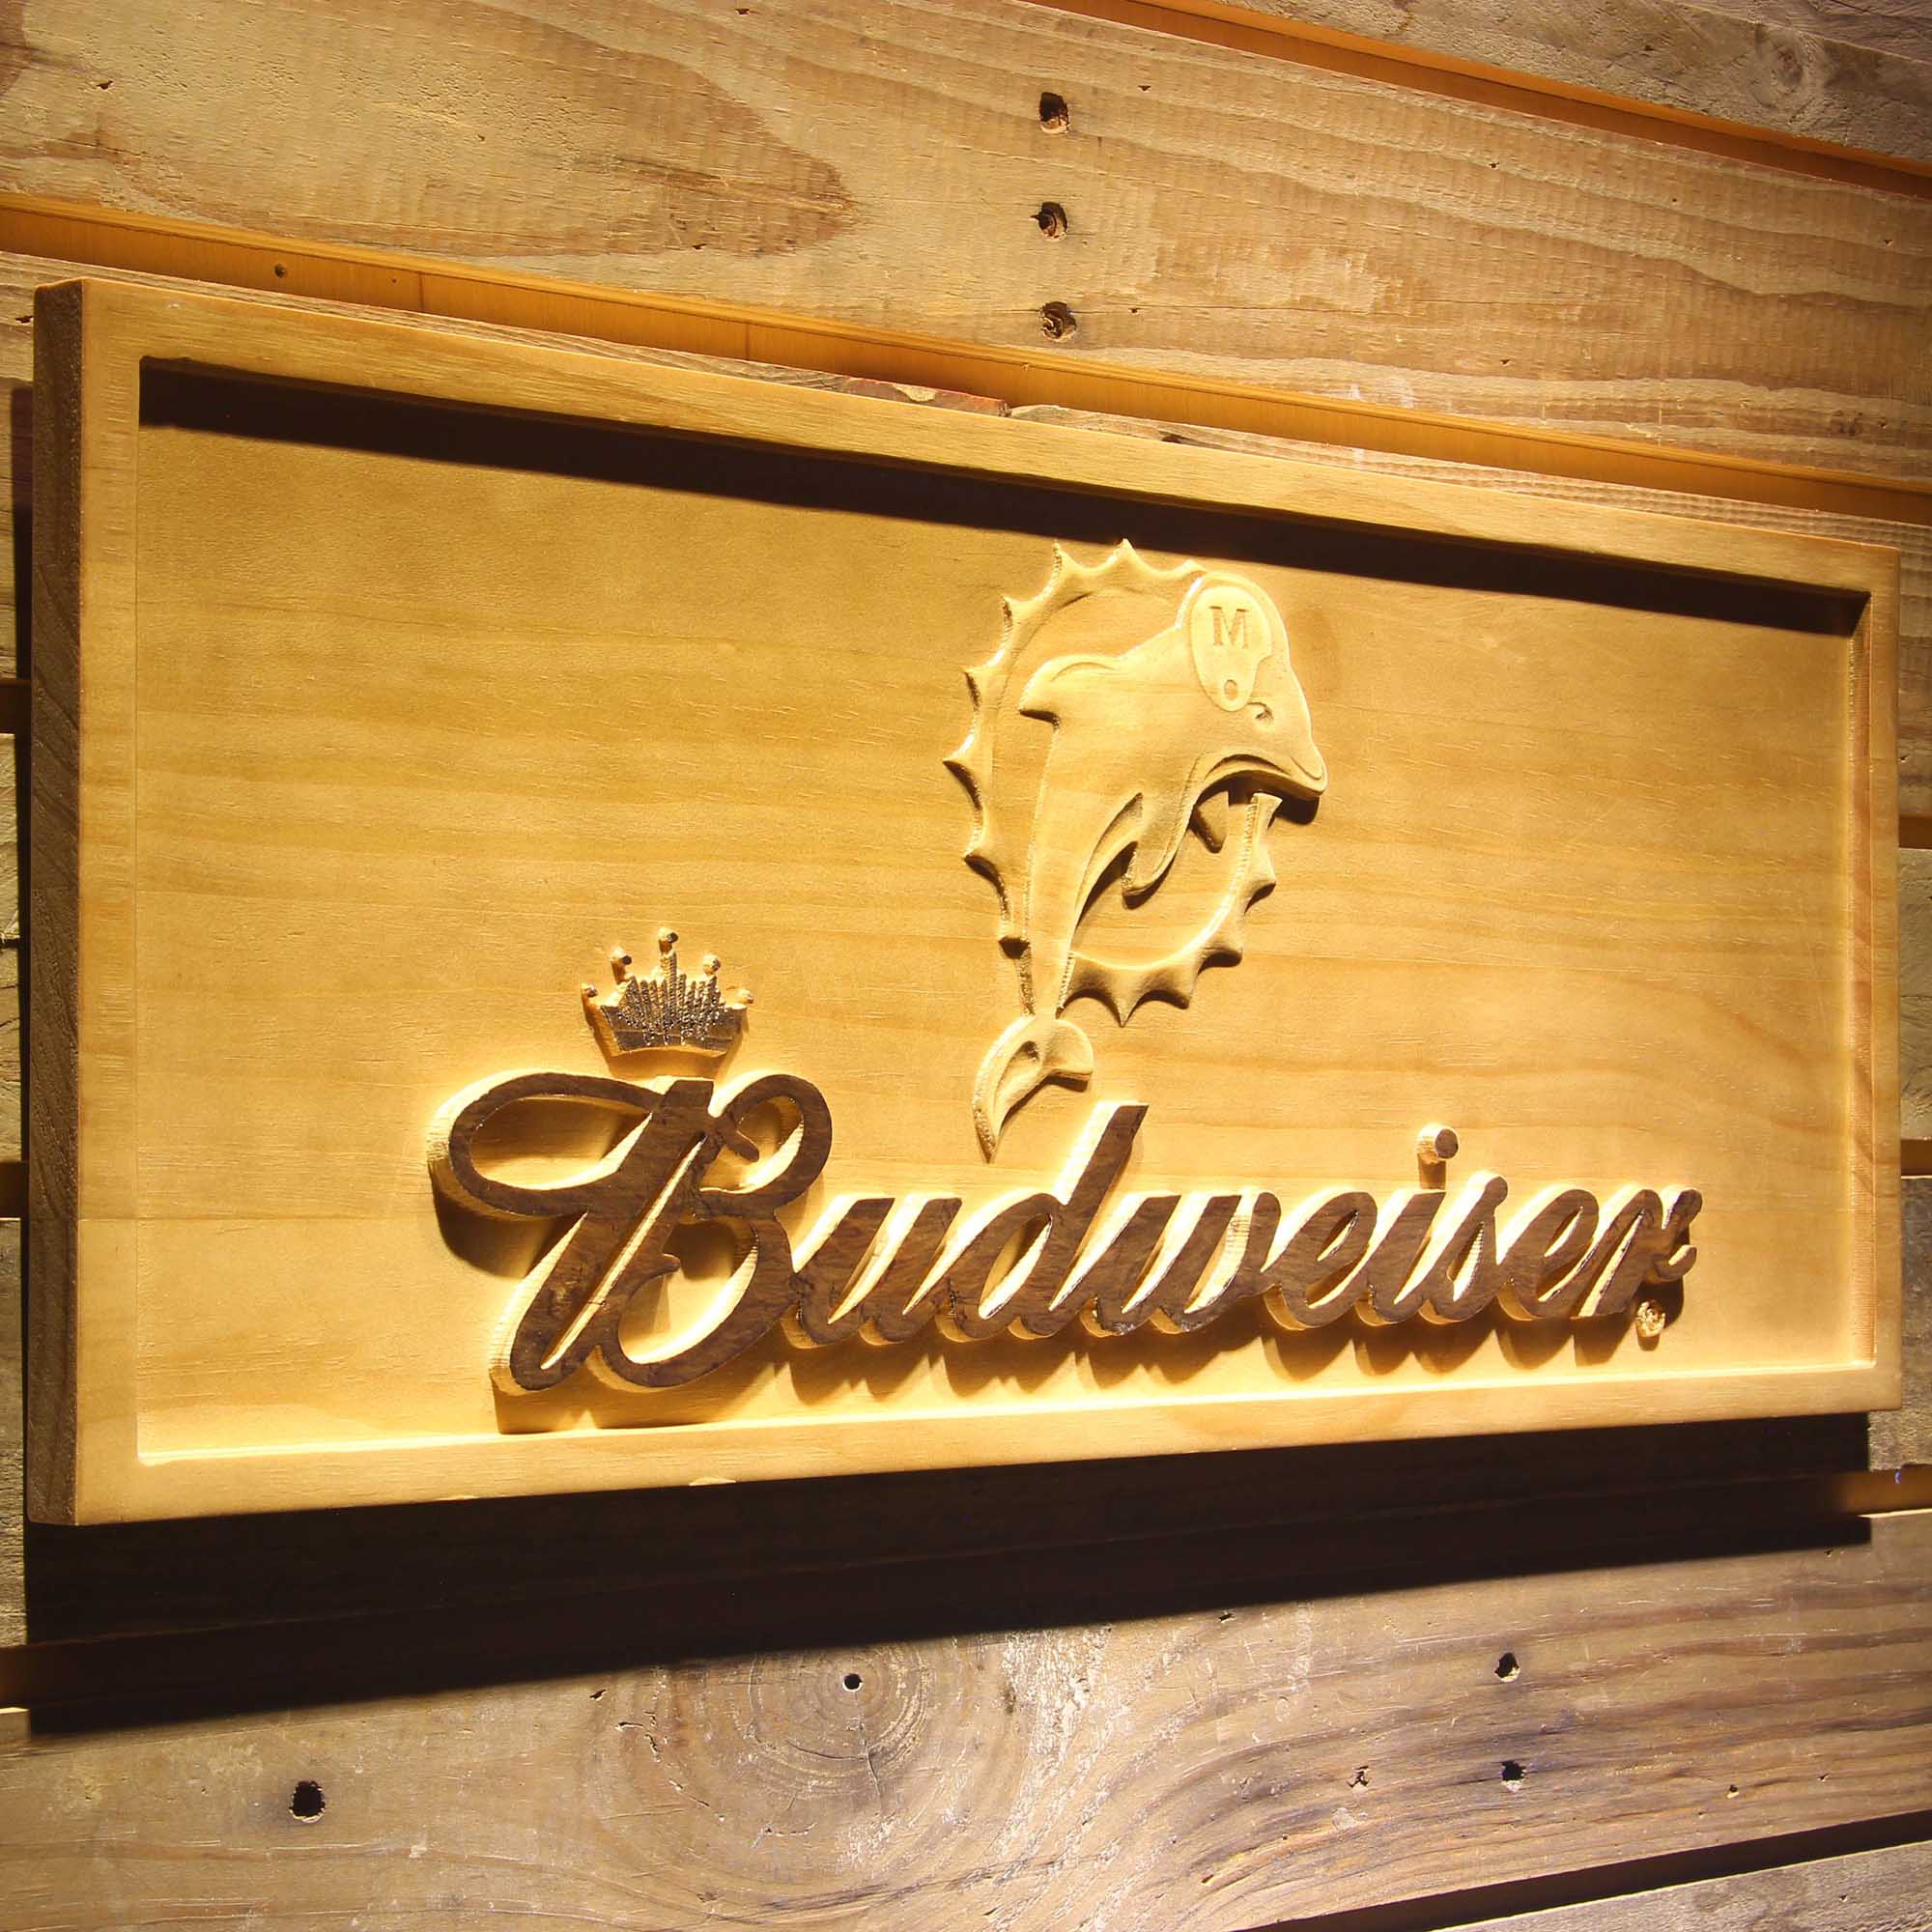 Miami Dolphins Budweiser 3D Solid Wooden Craving Sign